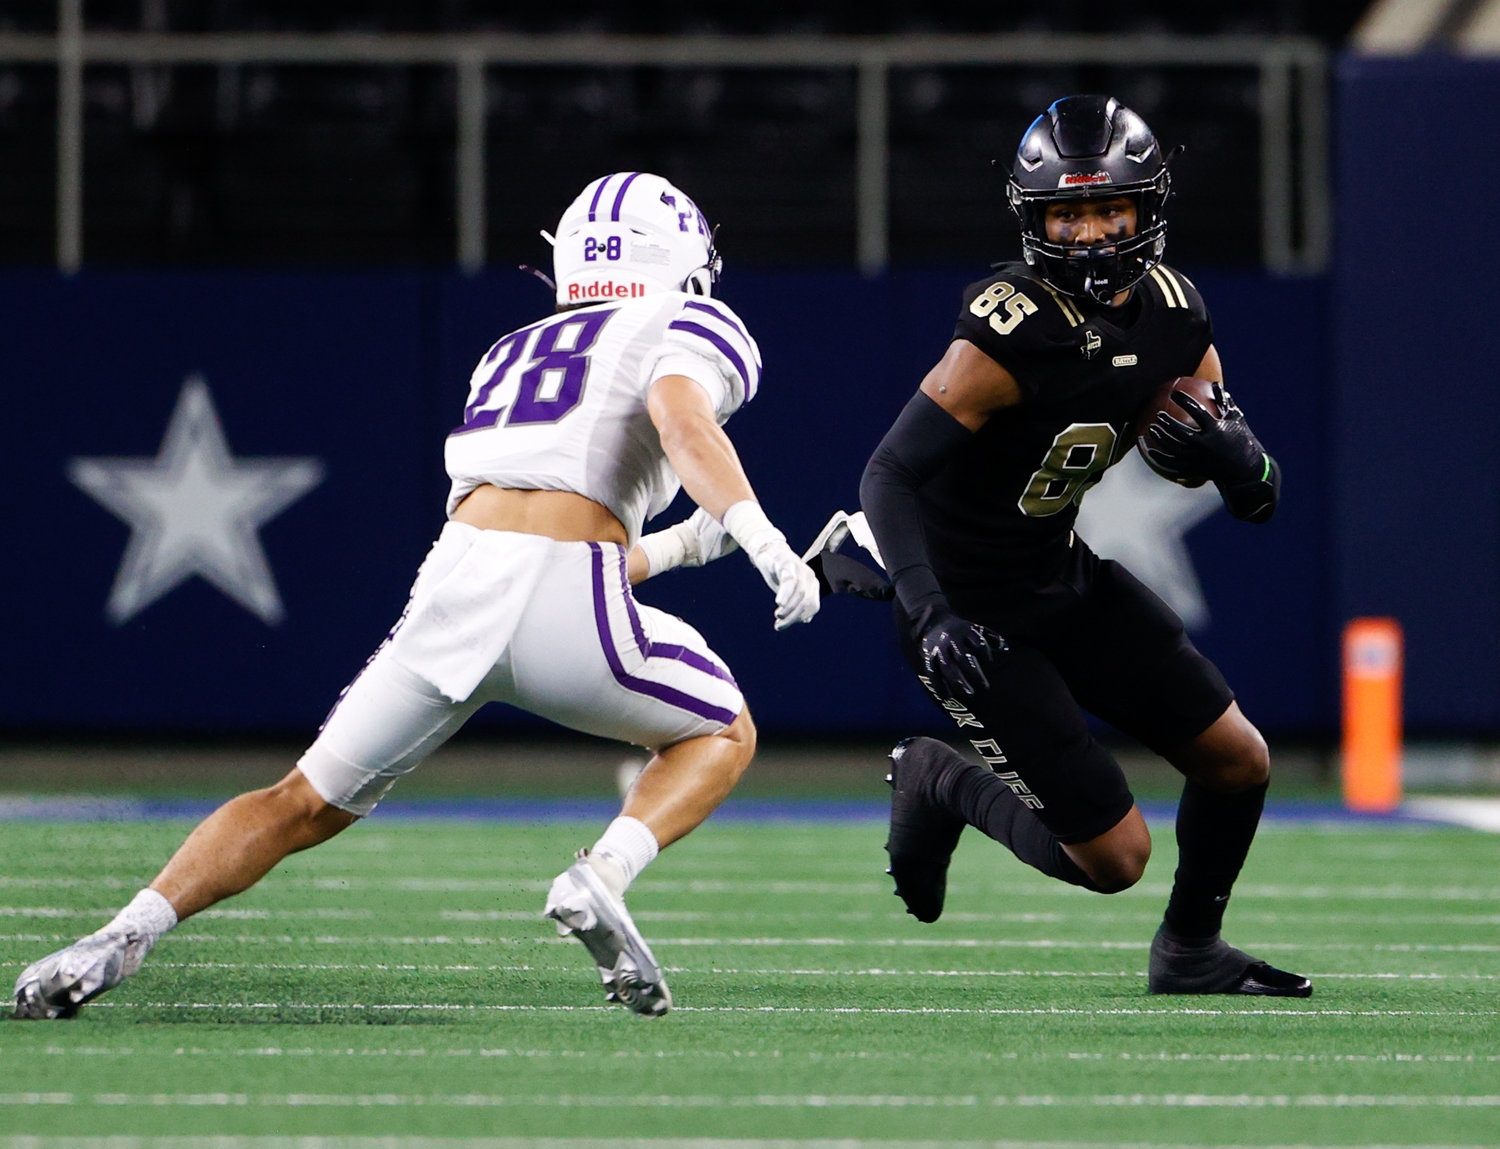 South Oak Cliff wide receiver Joshua Manley (85) carries the ball after a catch during the Class 5A Division II football state championship game between South Oak Cliff and Port Neches-Groves in Arlington, Texas, on Dec. 16, 2022.